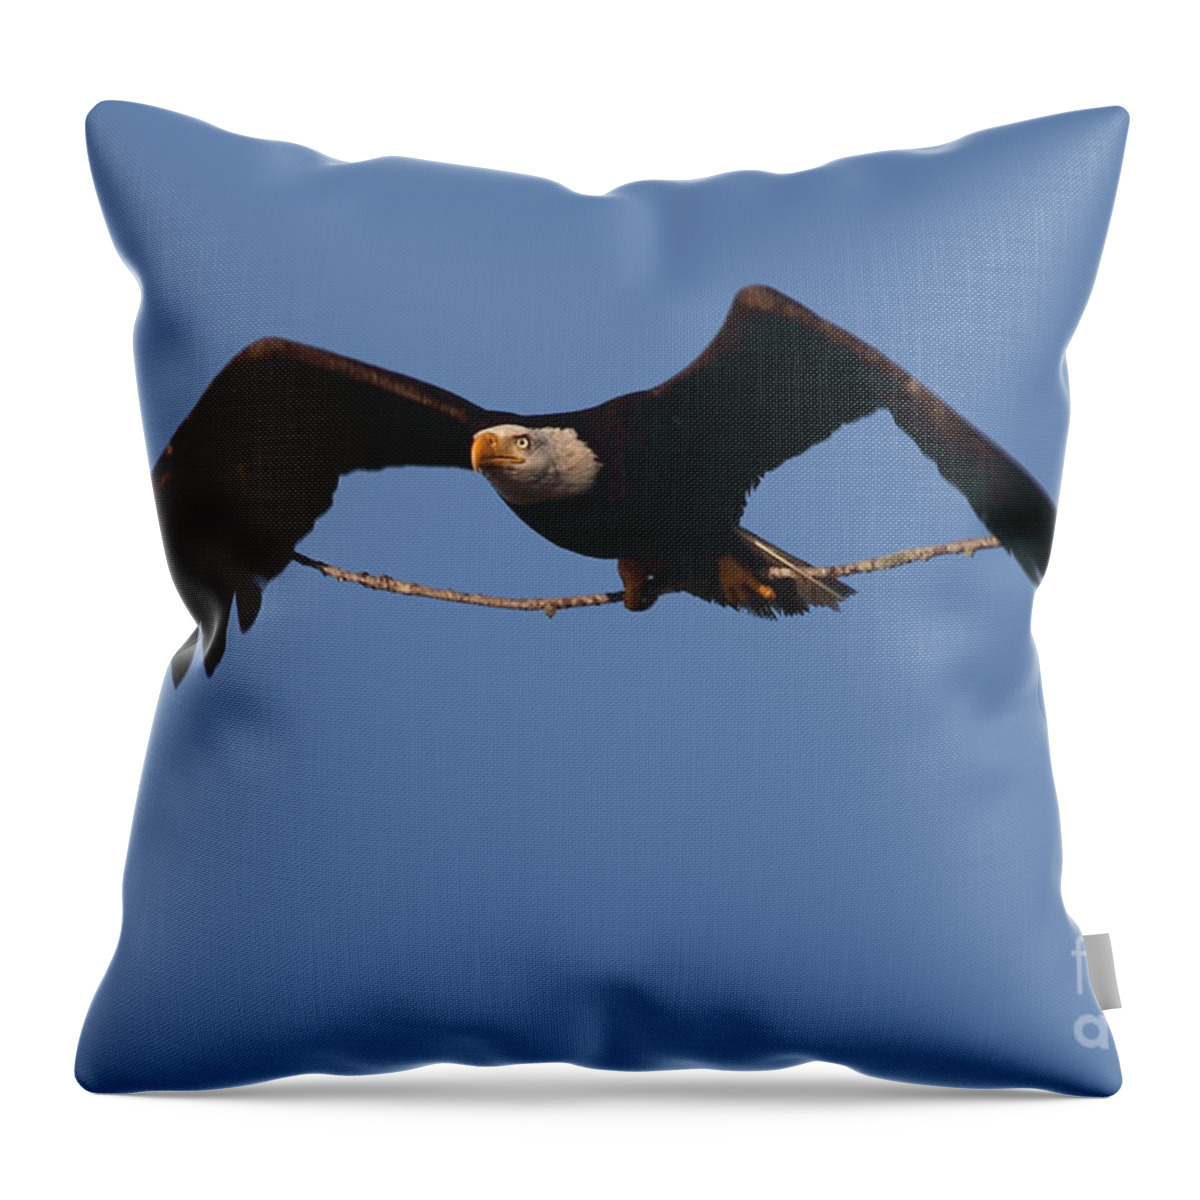 Bald Eagle Throw Pillow featuring the photograph Bald Eagle with Nesting Supplies by Meg Rousher